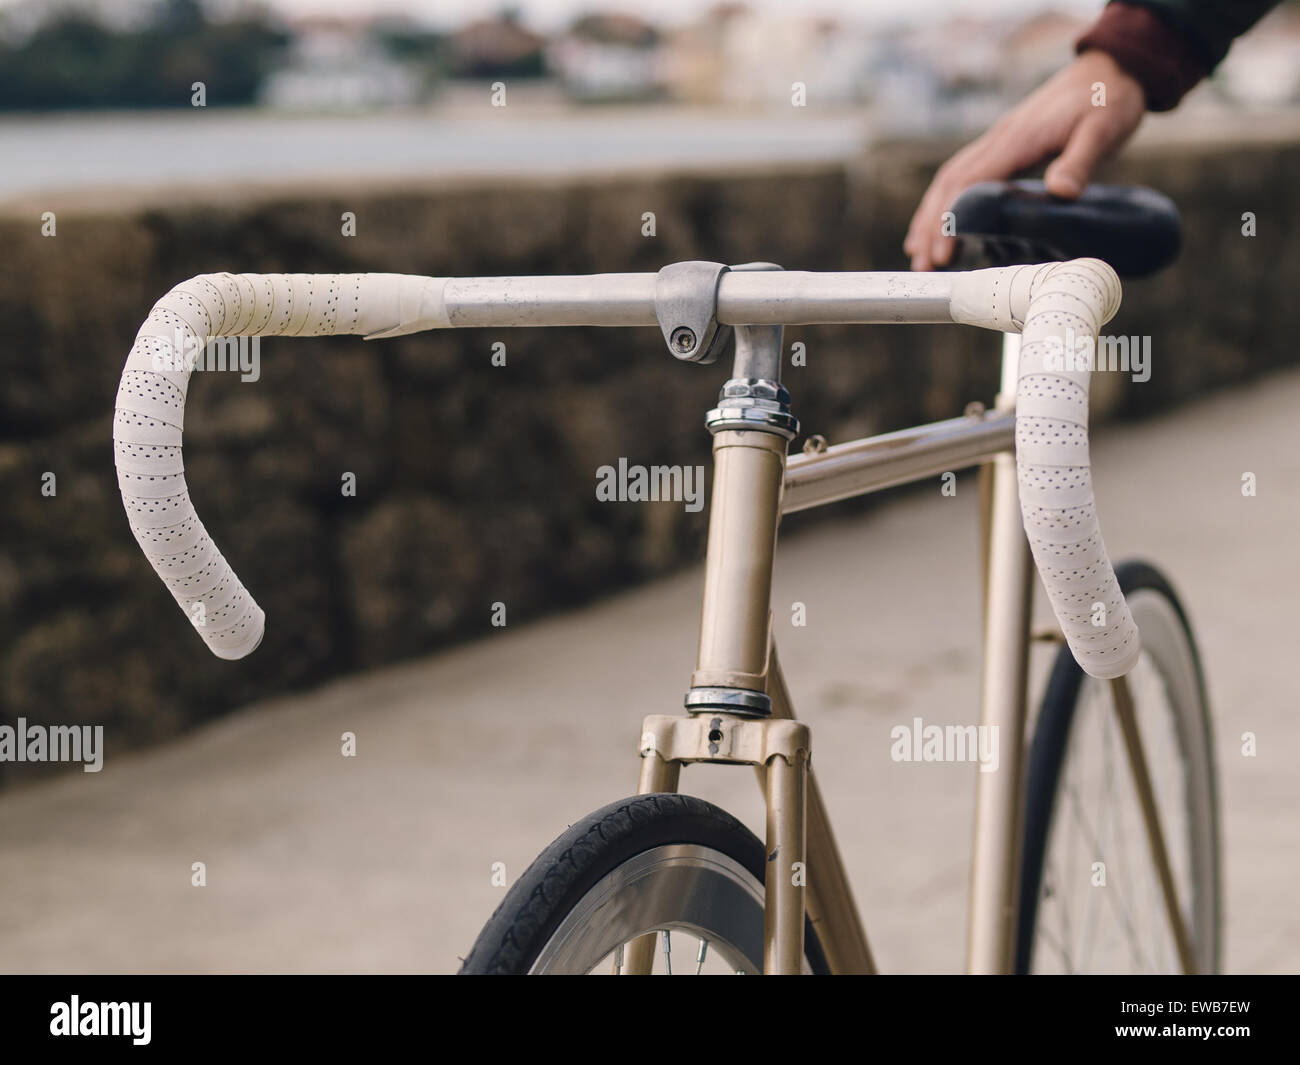 Fixie bicycle detail. Photo shows a close up handlebar. Stock Photo